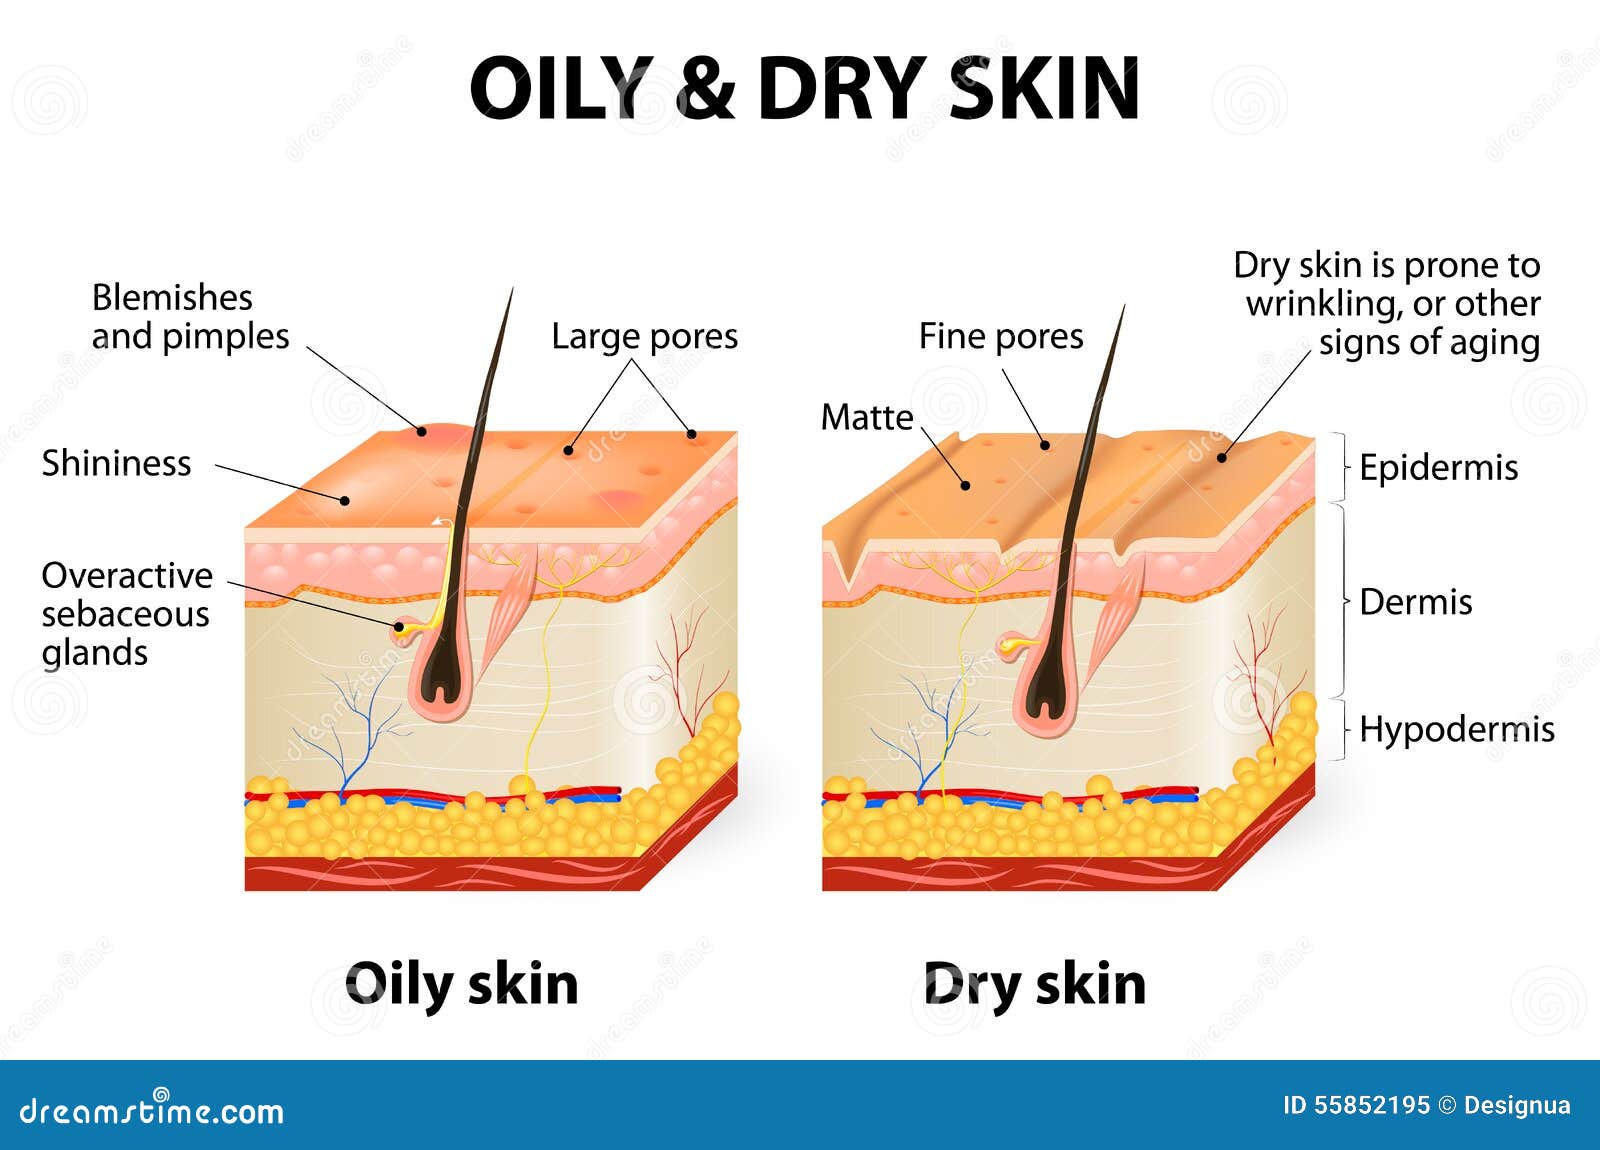 Types of Skin conditions - RightDiagnosis.com